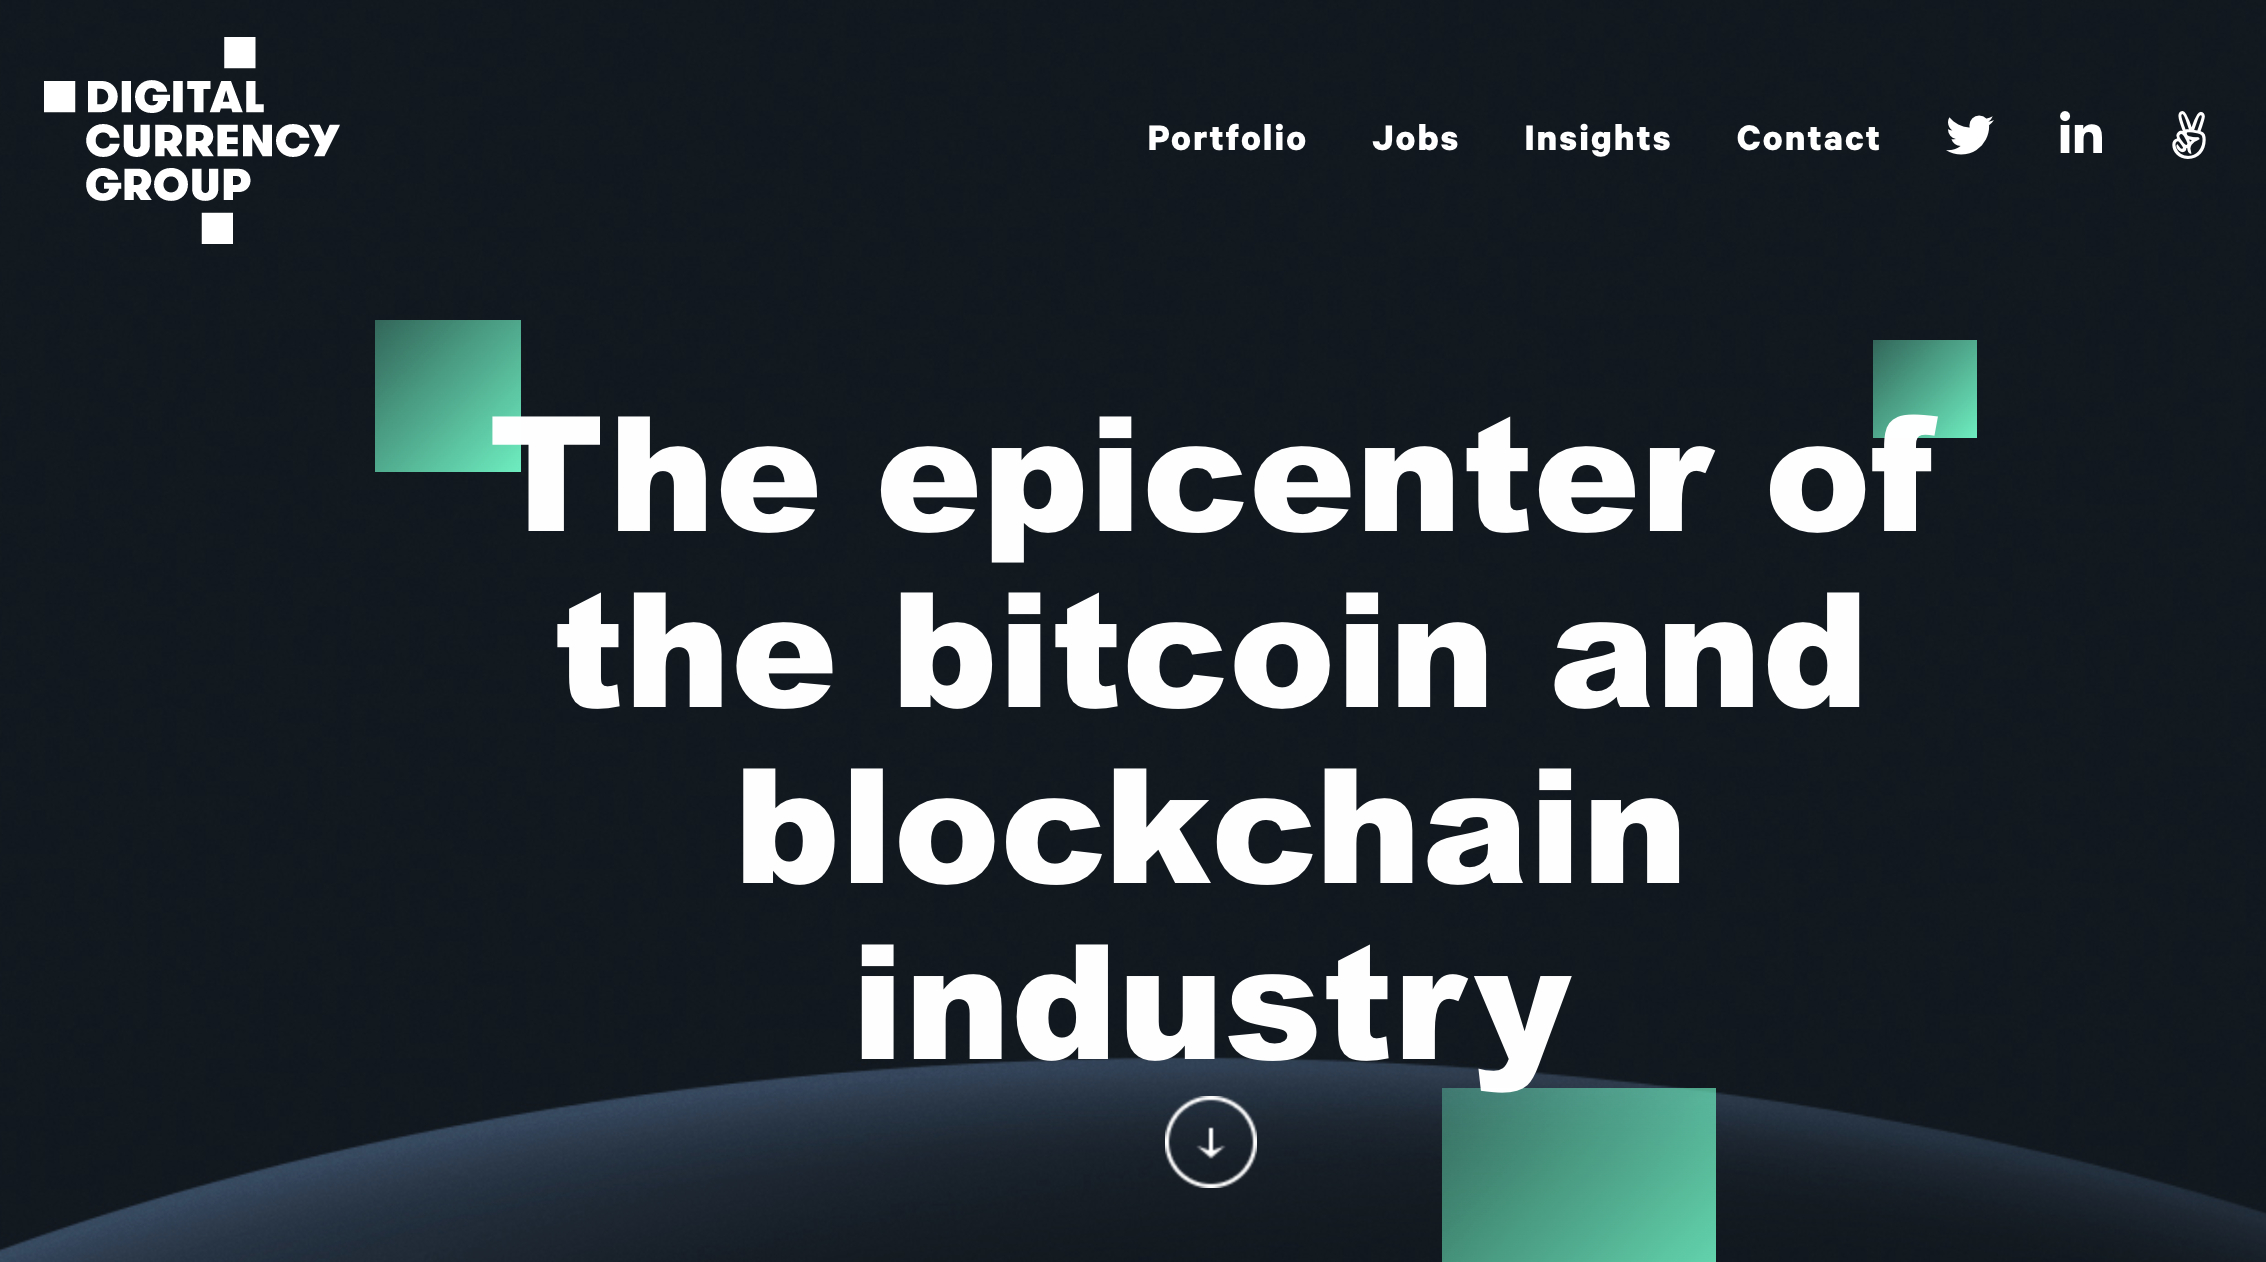 Digital Currency Group home page